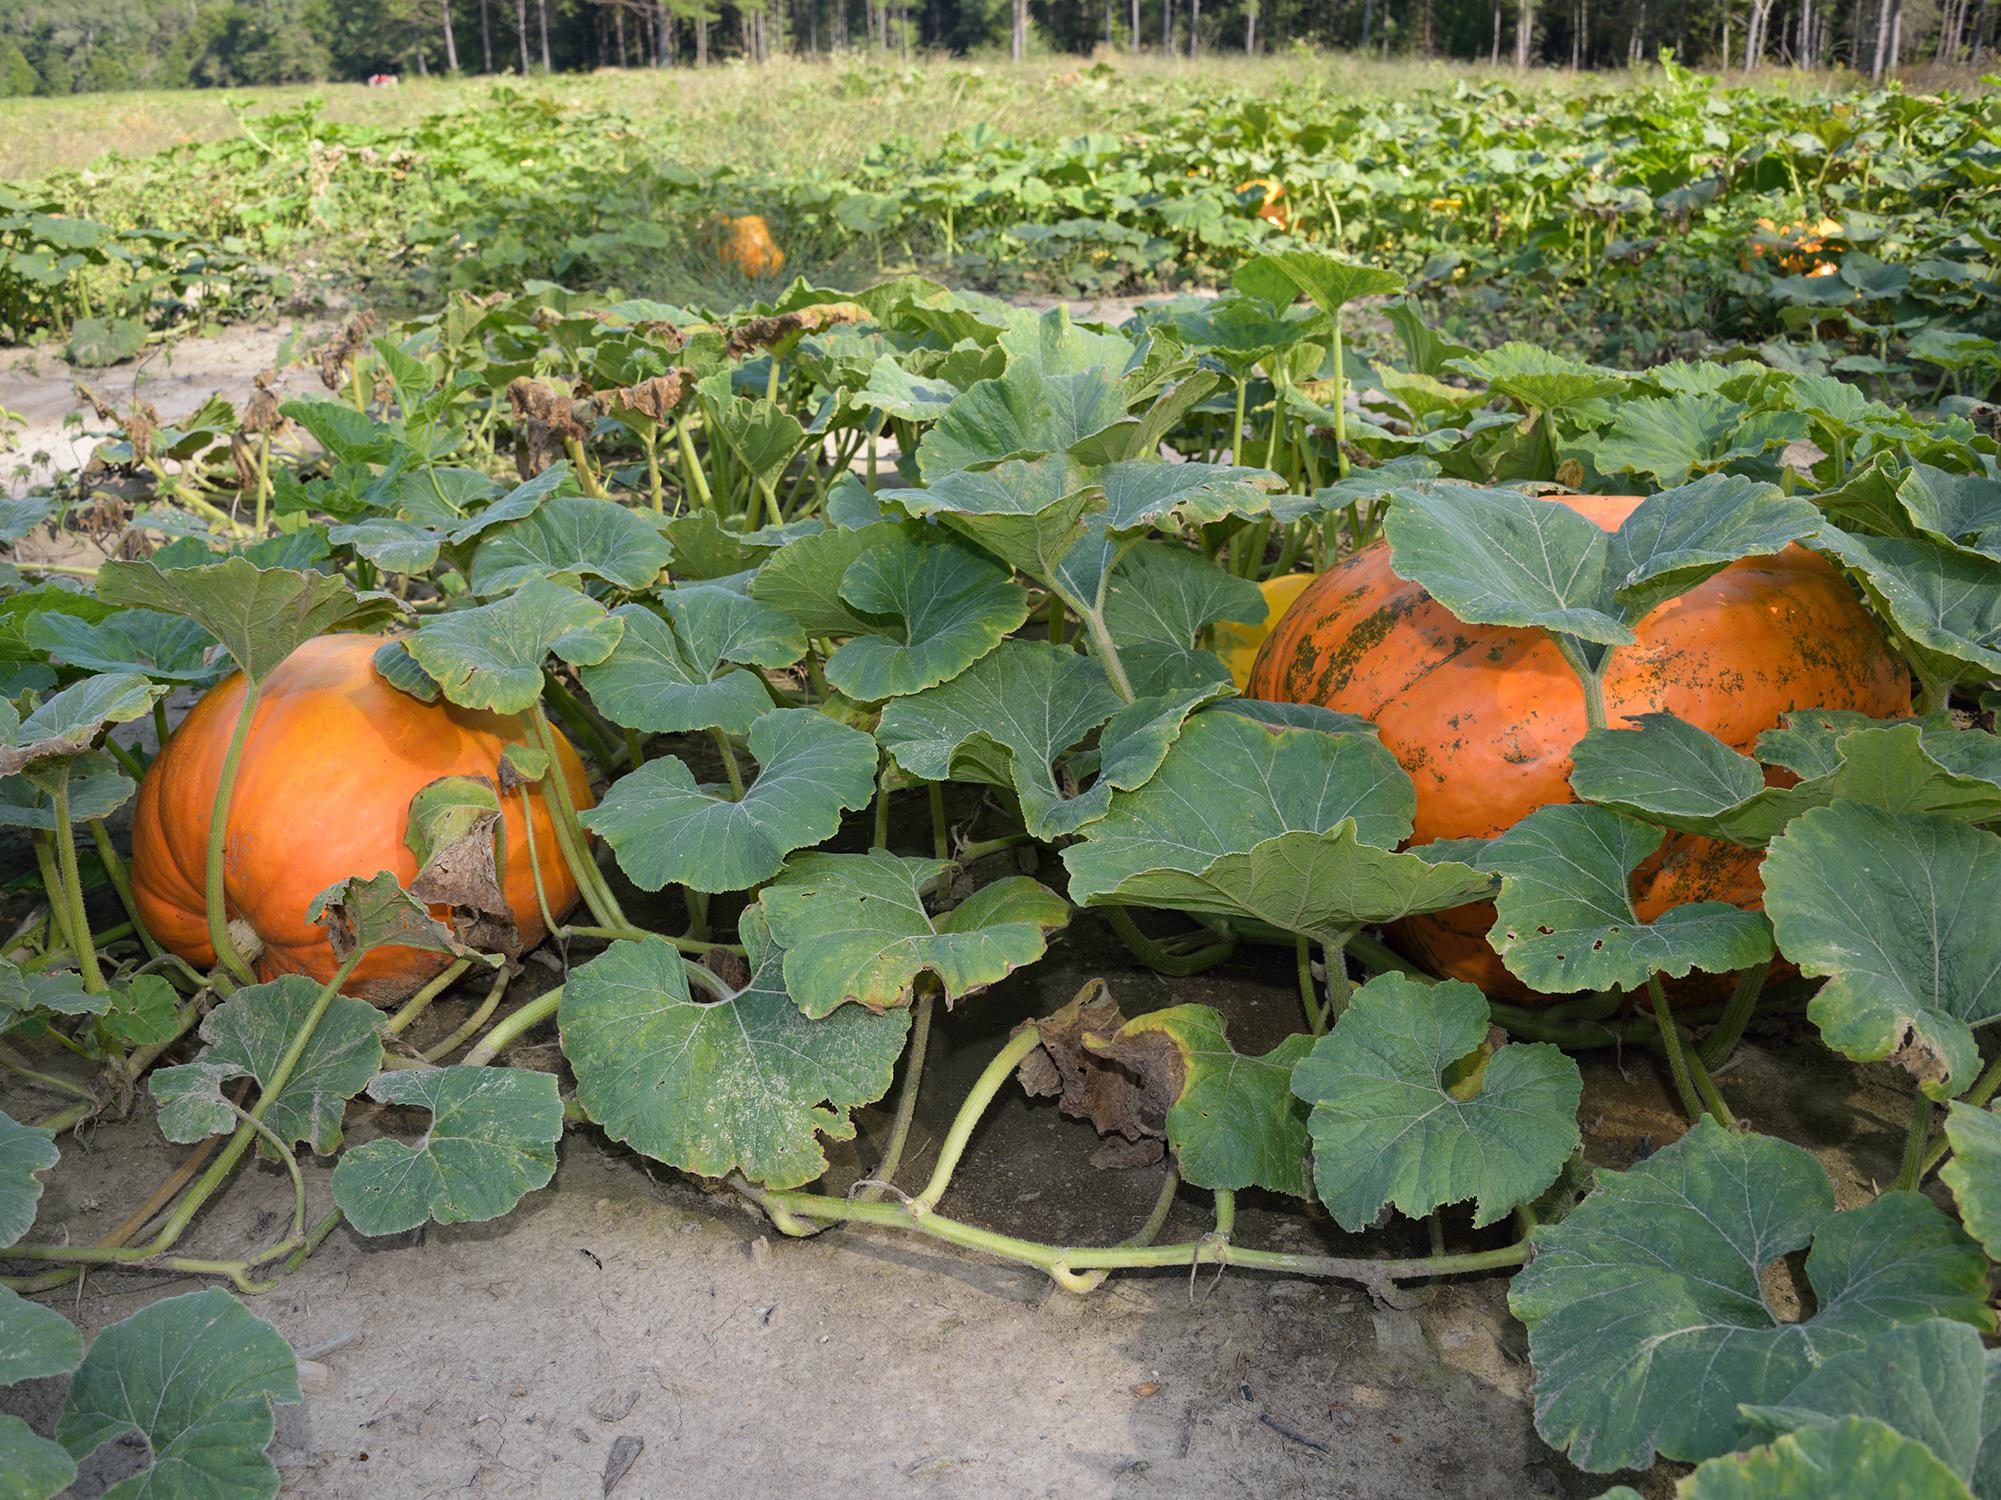 Two large, orange pumpkins grow on the vine in the foreground, with others visible in the background.